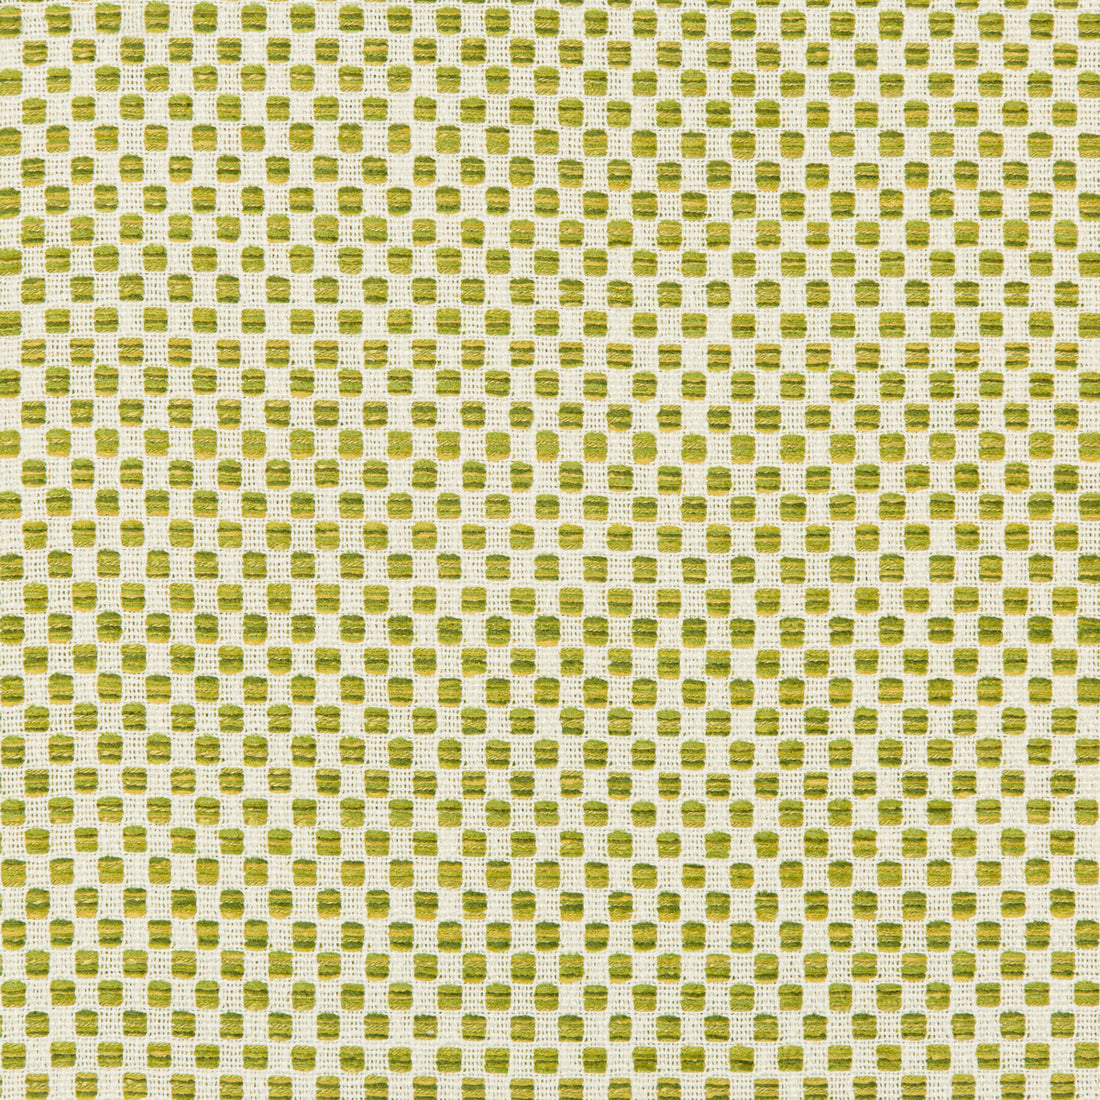 Kravet Design fabric in 36090-340 color - pattern 36090.340.0 - by Kravet Design in the Inside Out Performance Fabrics collection